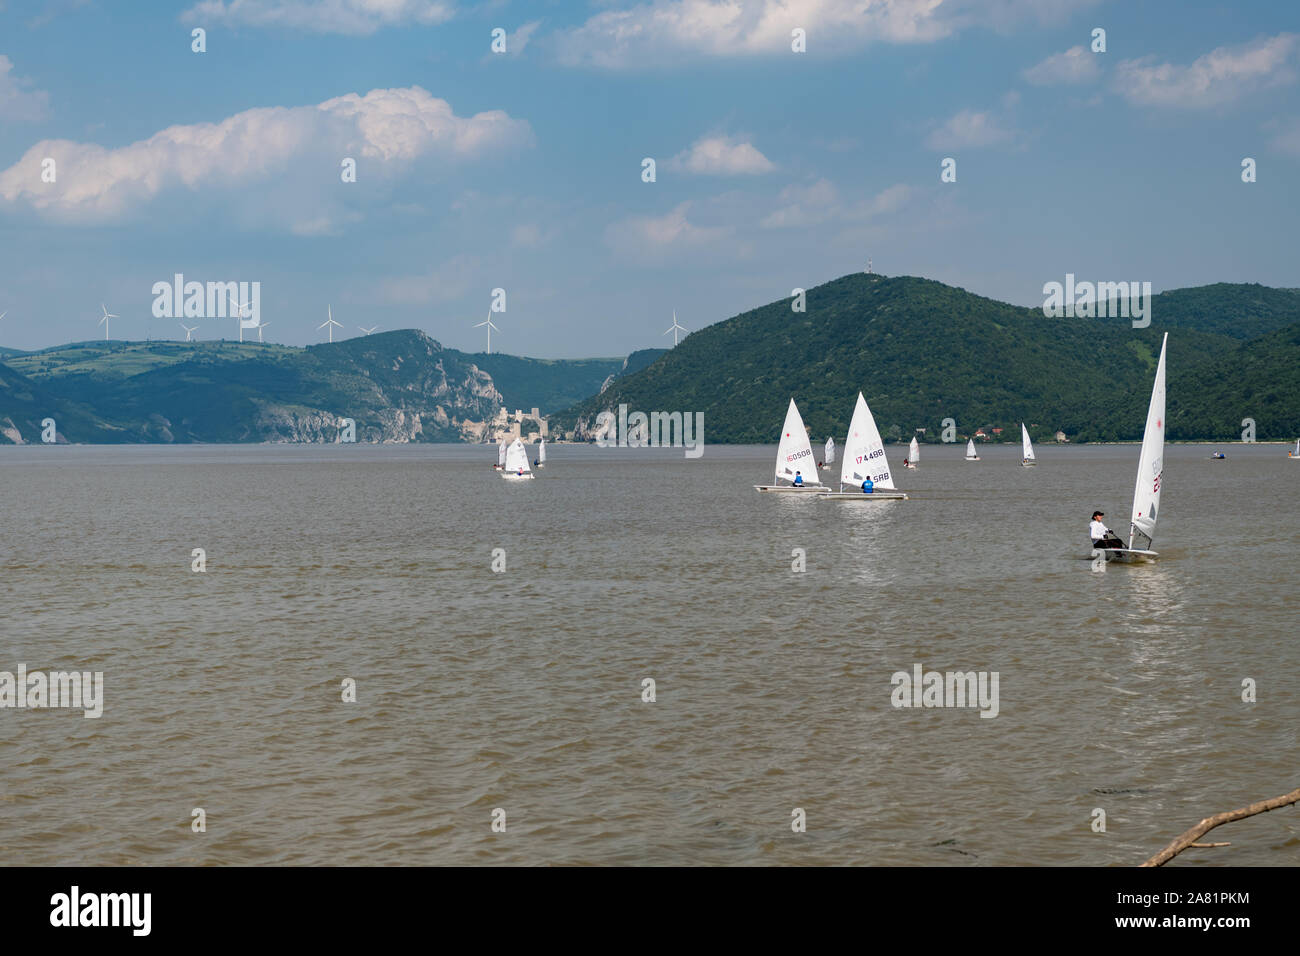 Sunny morning view of restless wather and lots of windsurfing seaboats  on the river Danube, with mountines in the background and cloudy sky high abov Stock Photo